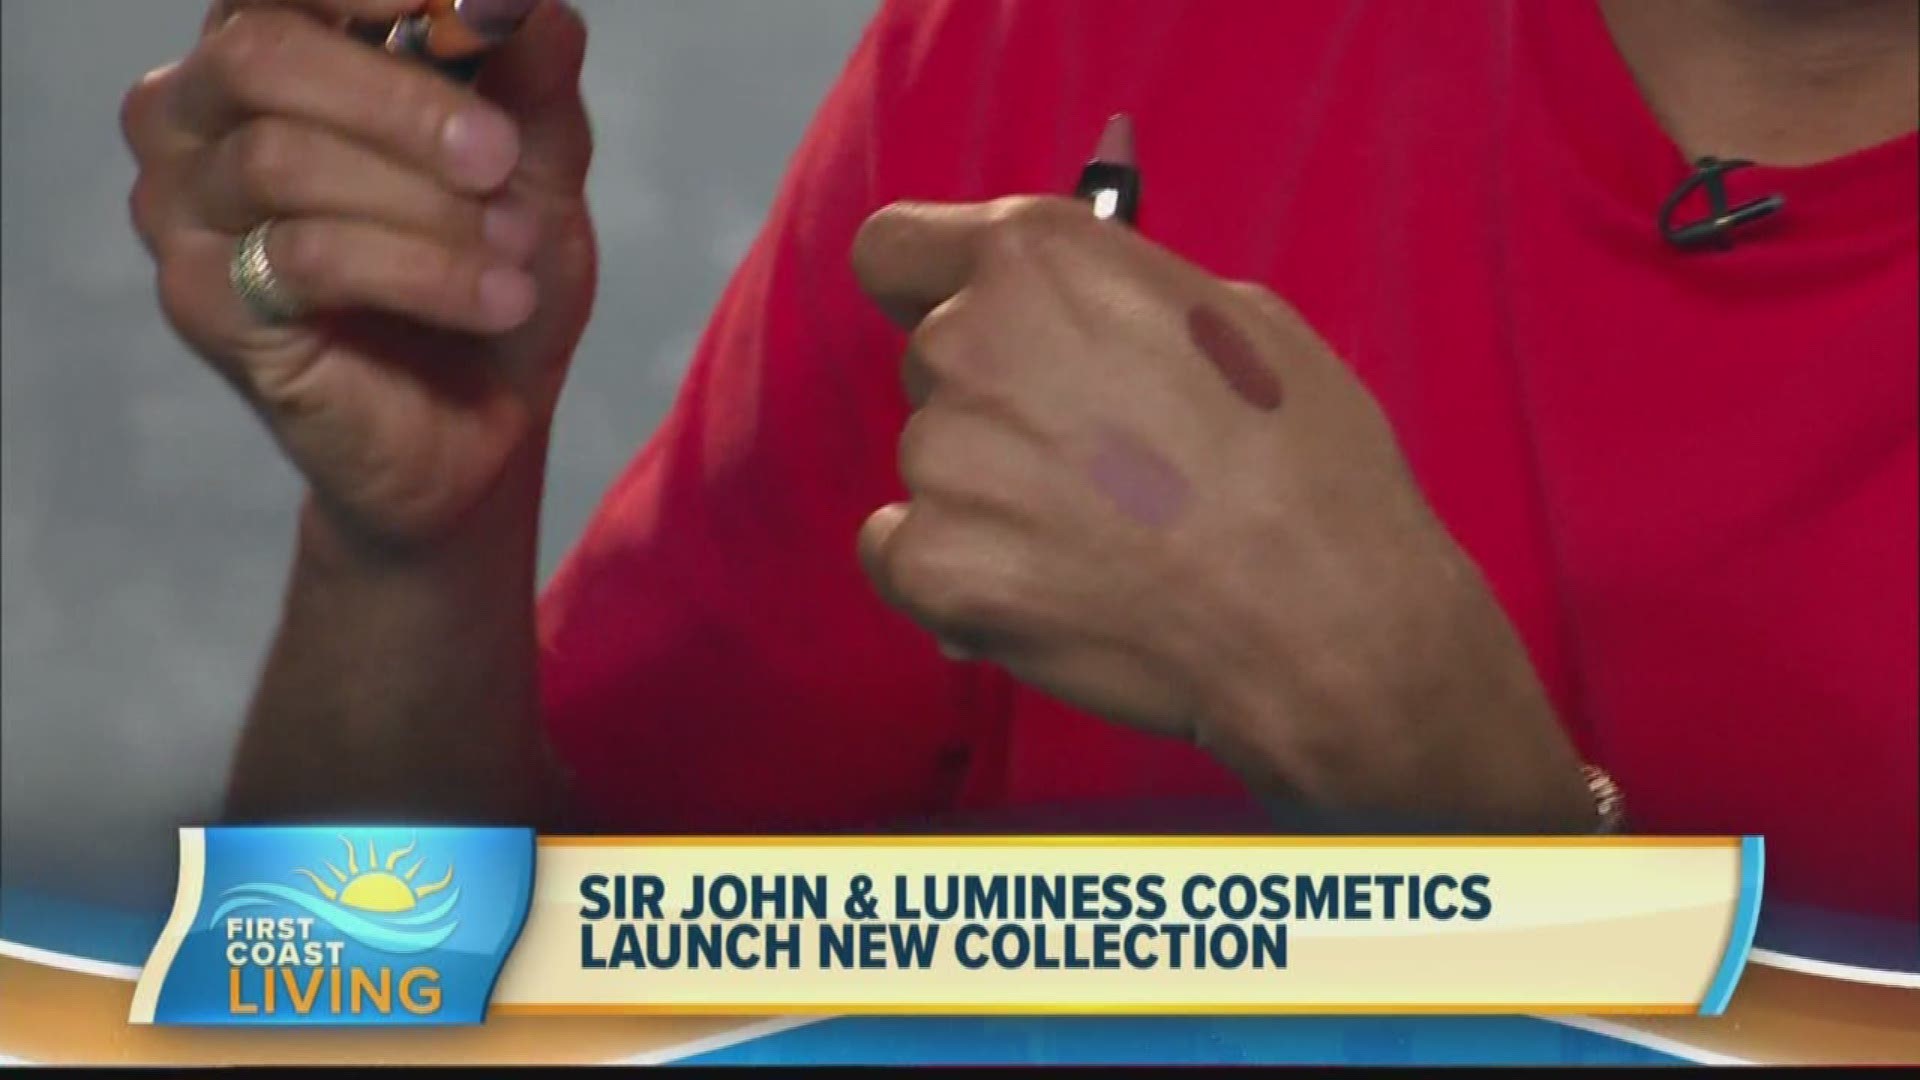 Celebrity make up artist Sir John teams up with Luminess Cosmetics to launch new 'The Lion King' cosmetic line.